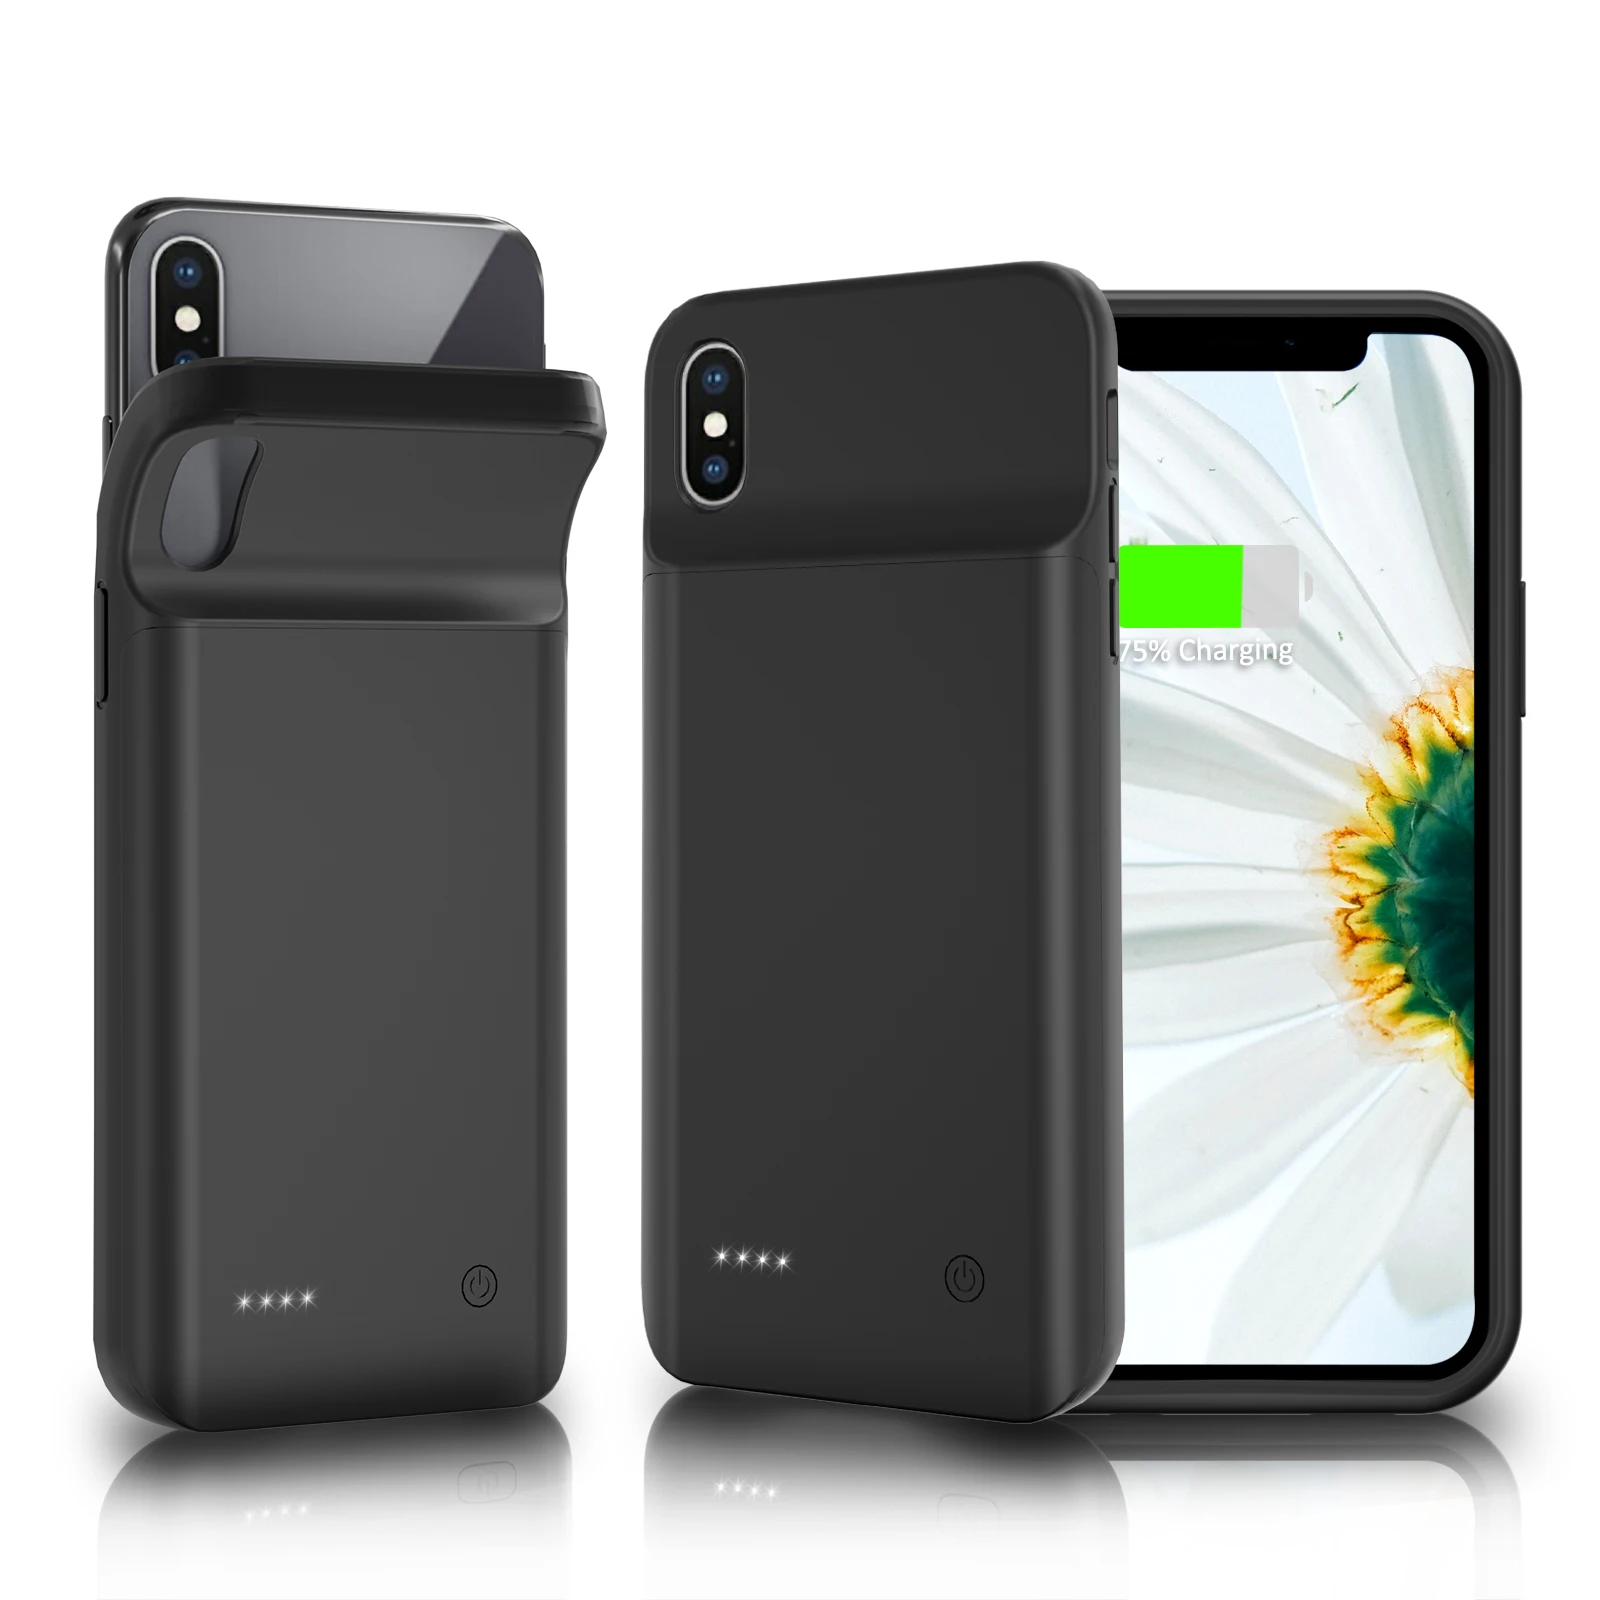 6000mAh For iPhone X XS Xs Max Battery Charger Case Charging Case Portable Mobile Phone Housing Power Bank Backup Fast Charger